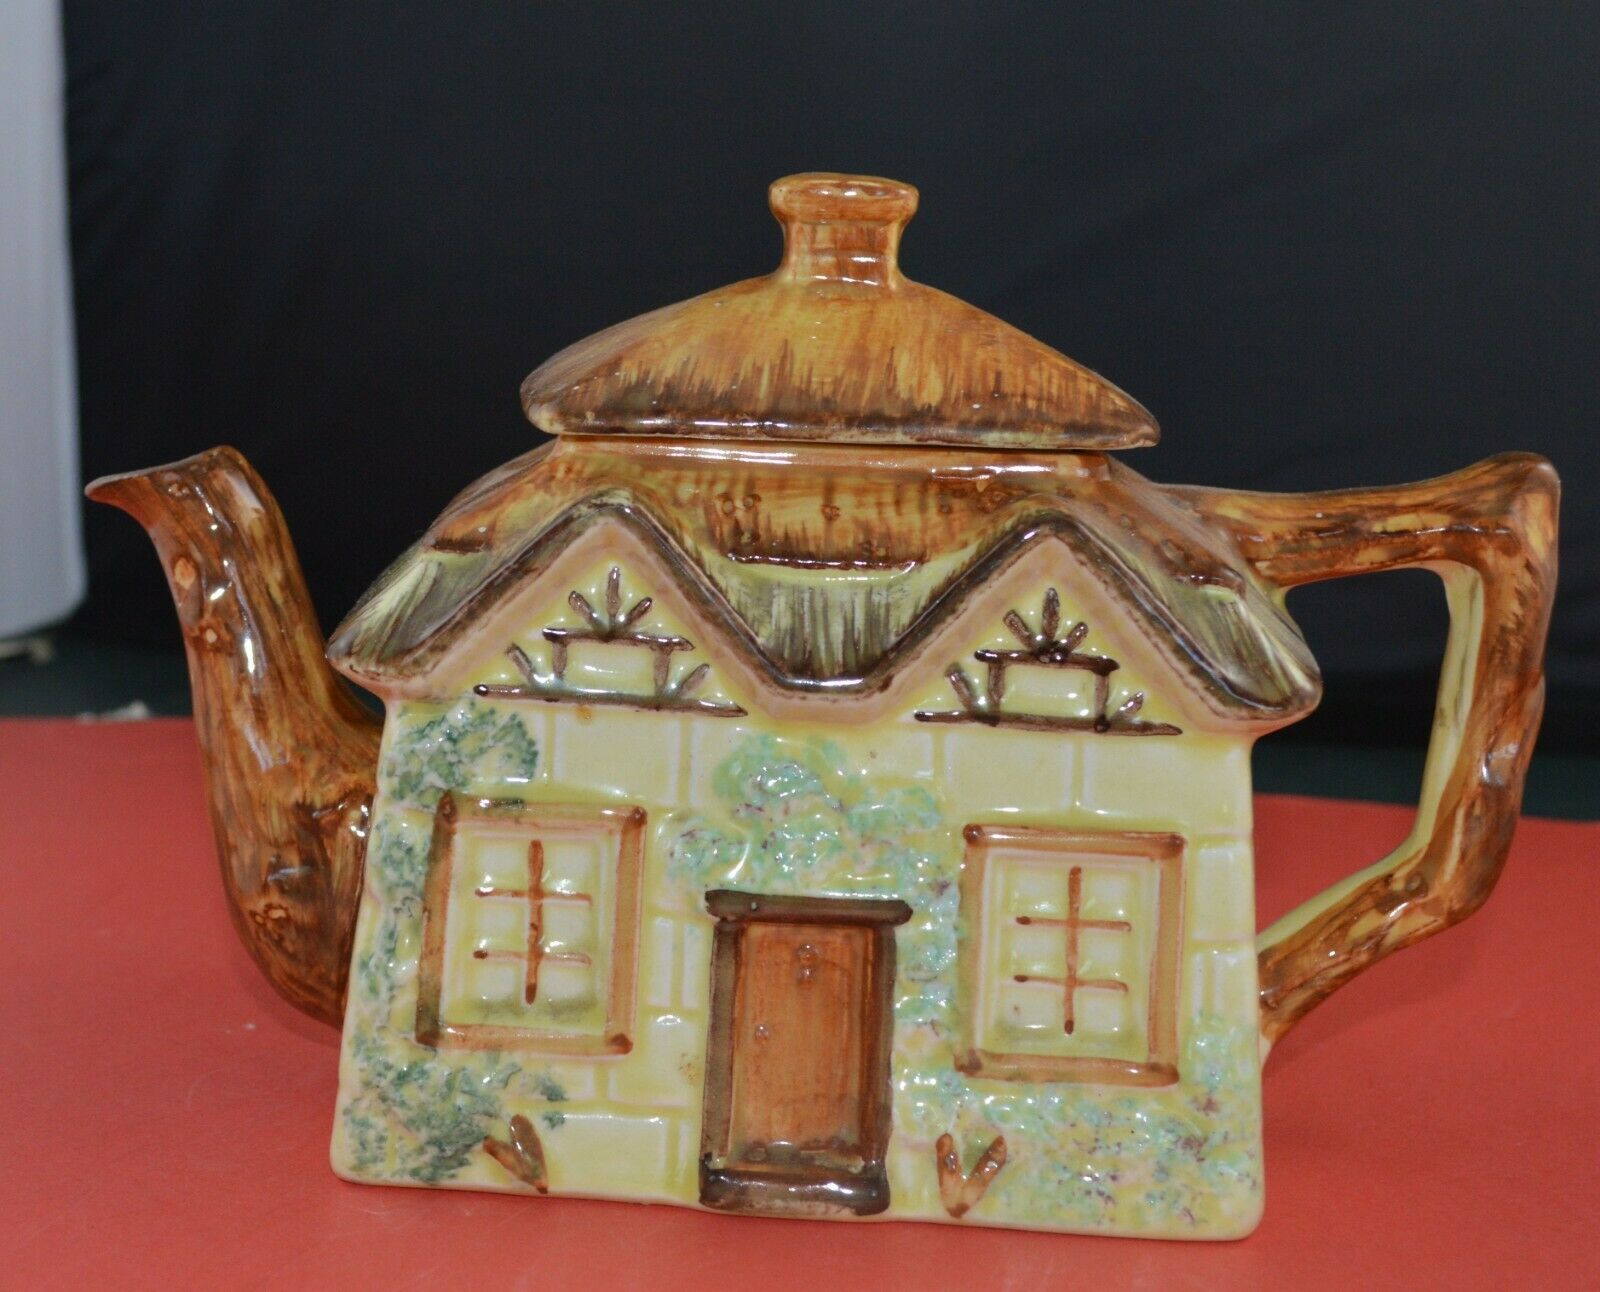 COTTAGEWARE KEELE STREET POTTERY TEAPOT MILK JUG COVERED SUGAR CONTAINER(PREVIOUSLY OWNED) FAIRLY GOOD CONDITION - TMD167207